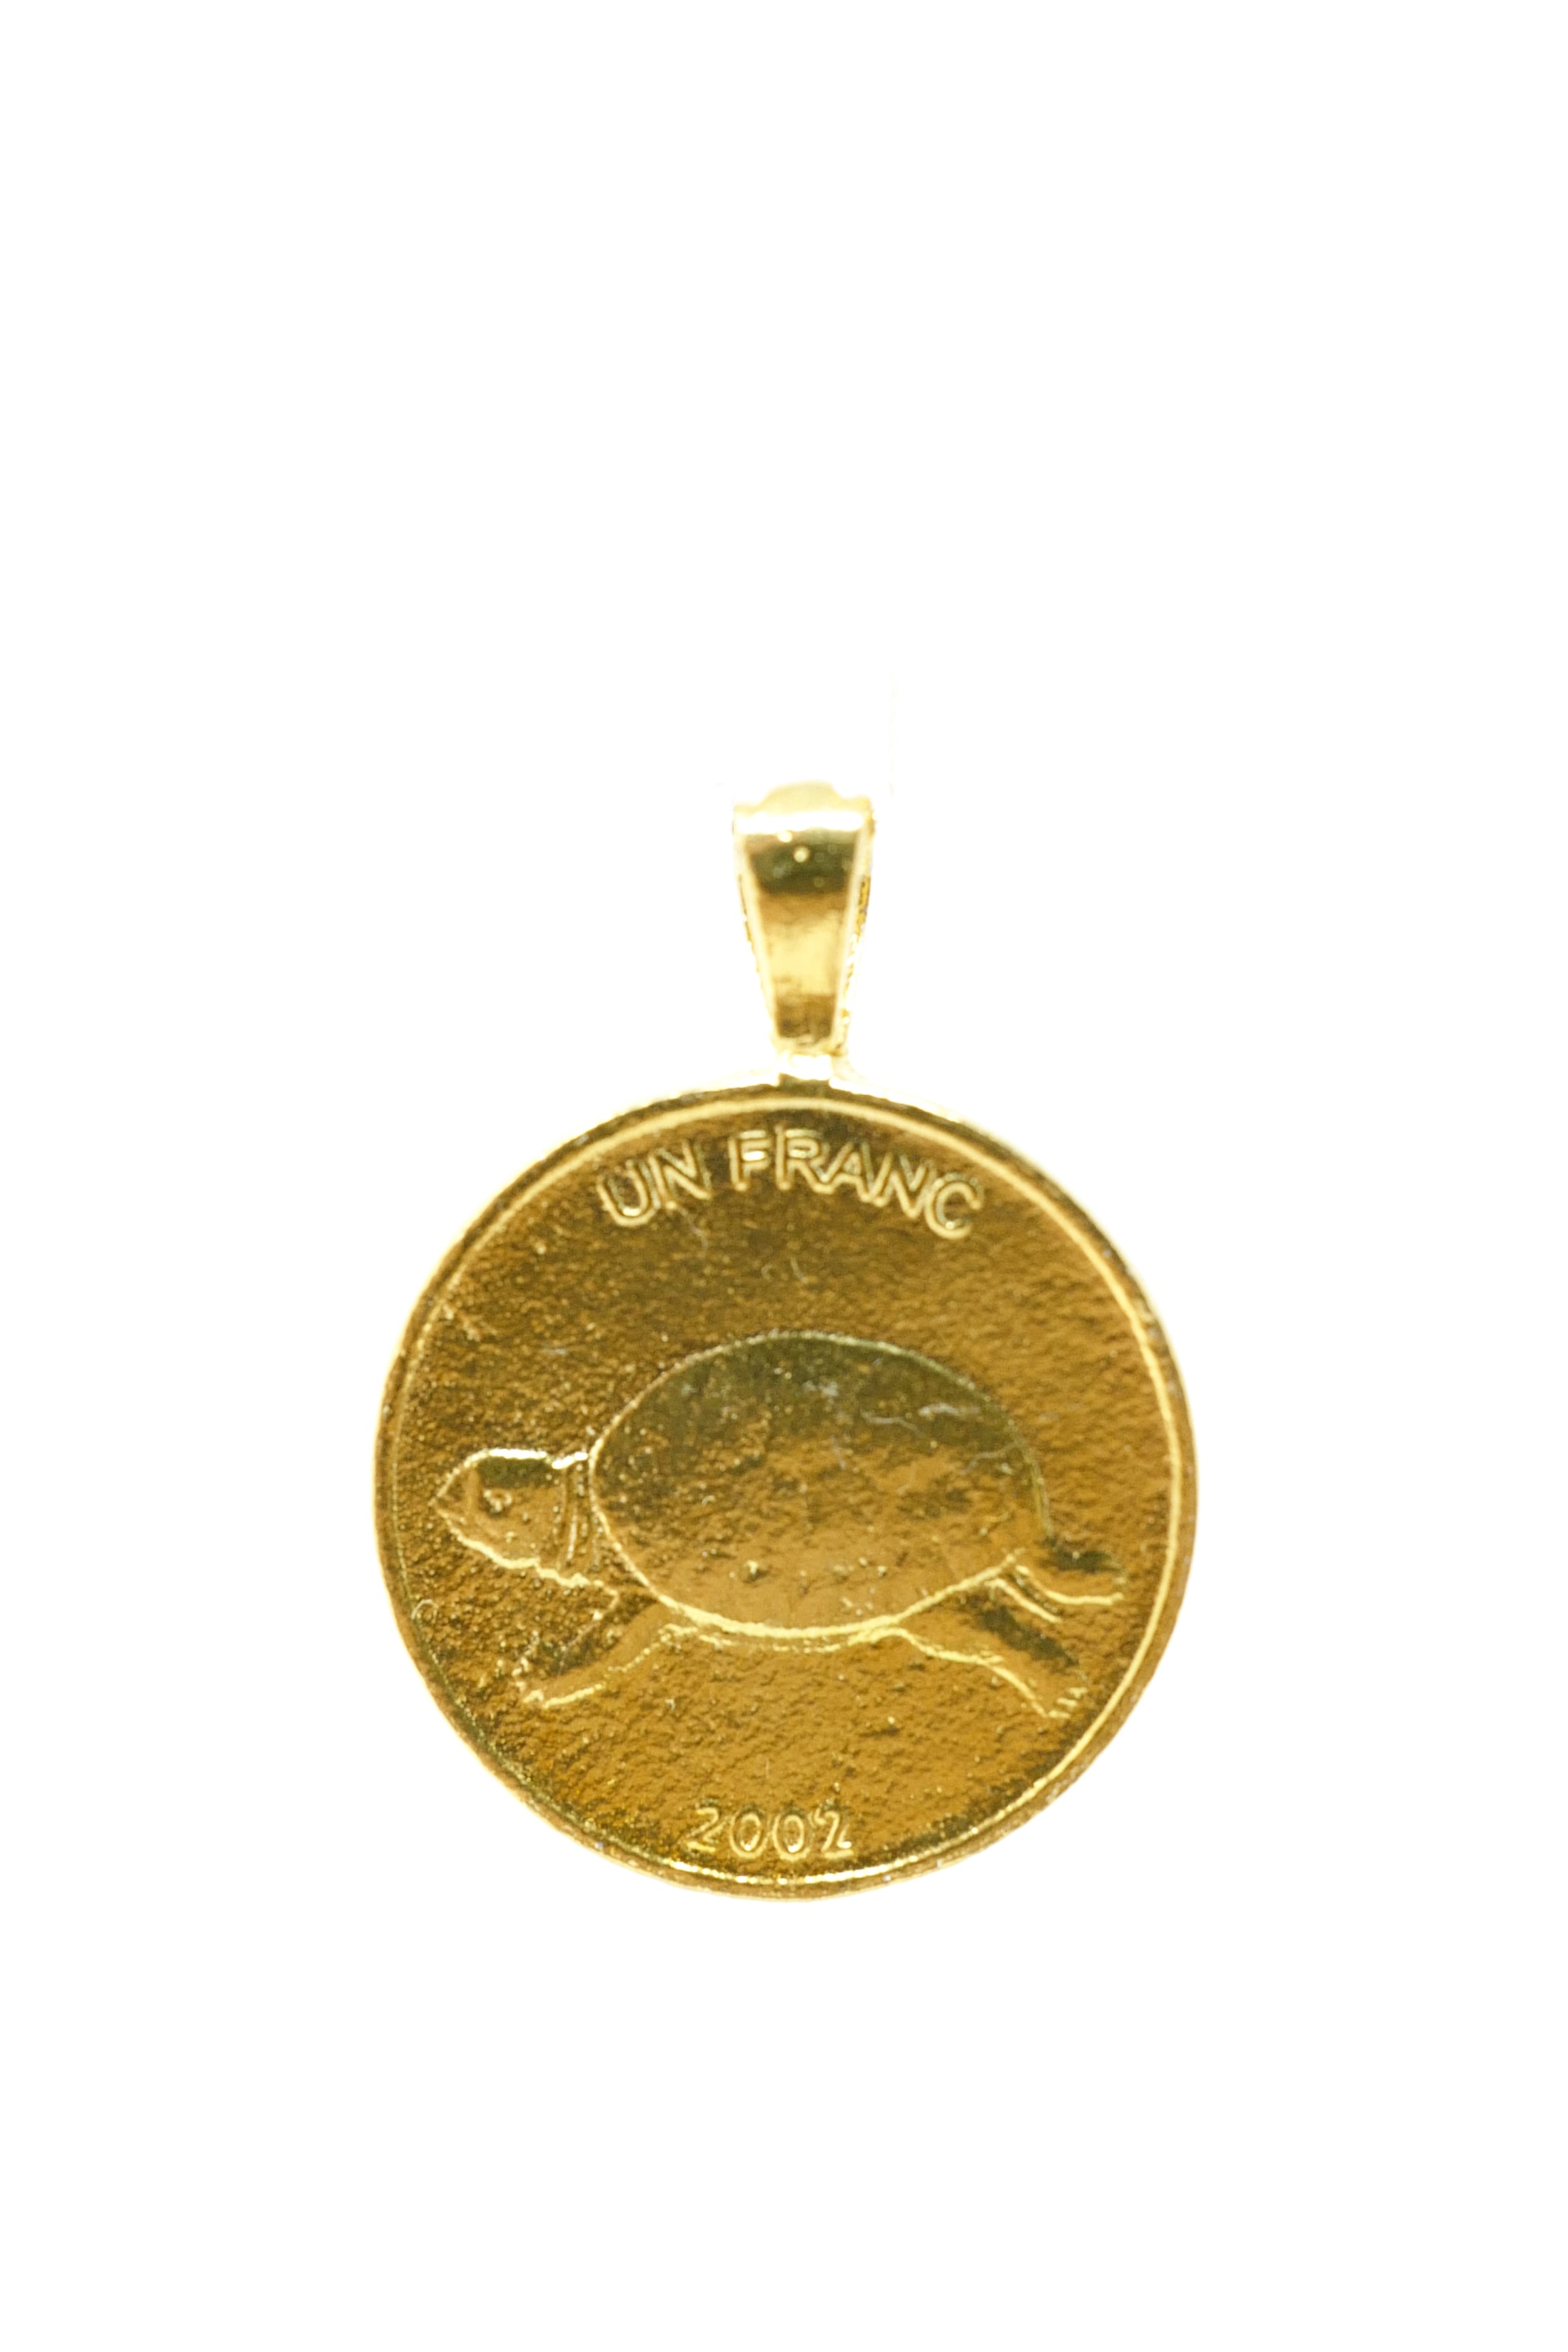 THE CONGO Lion and Turtle Pendant